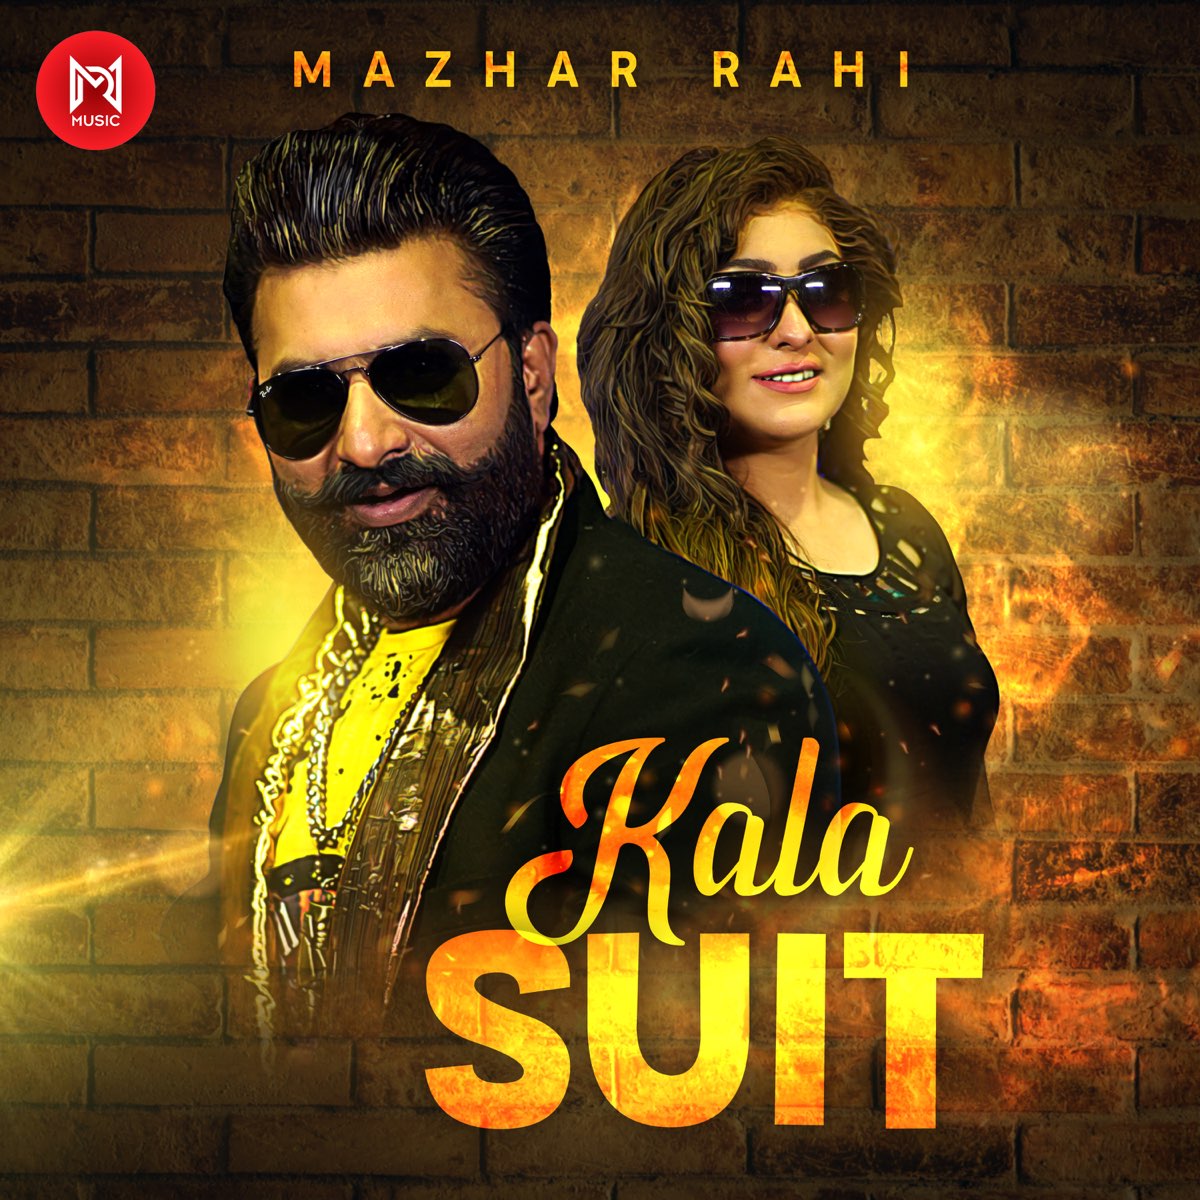 Stream episode Kala Suit Pehnke Challe Se MP3 Audio Haryanvi Song by AS  Production House podcast | Listen online for free on SoundCloud